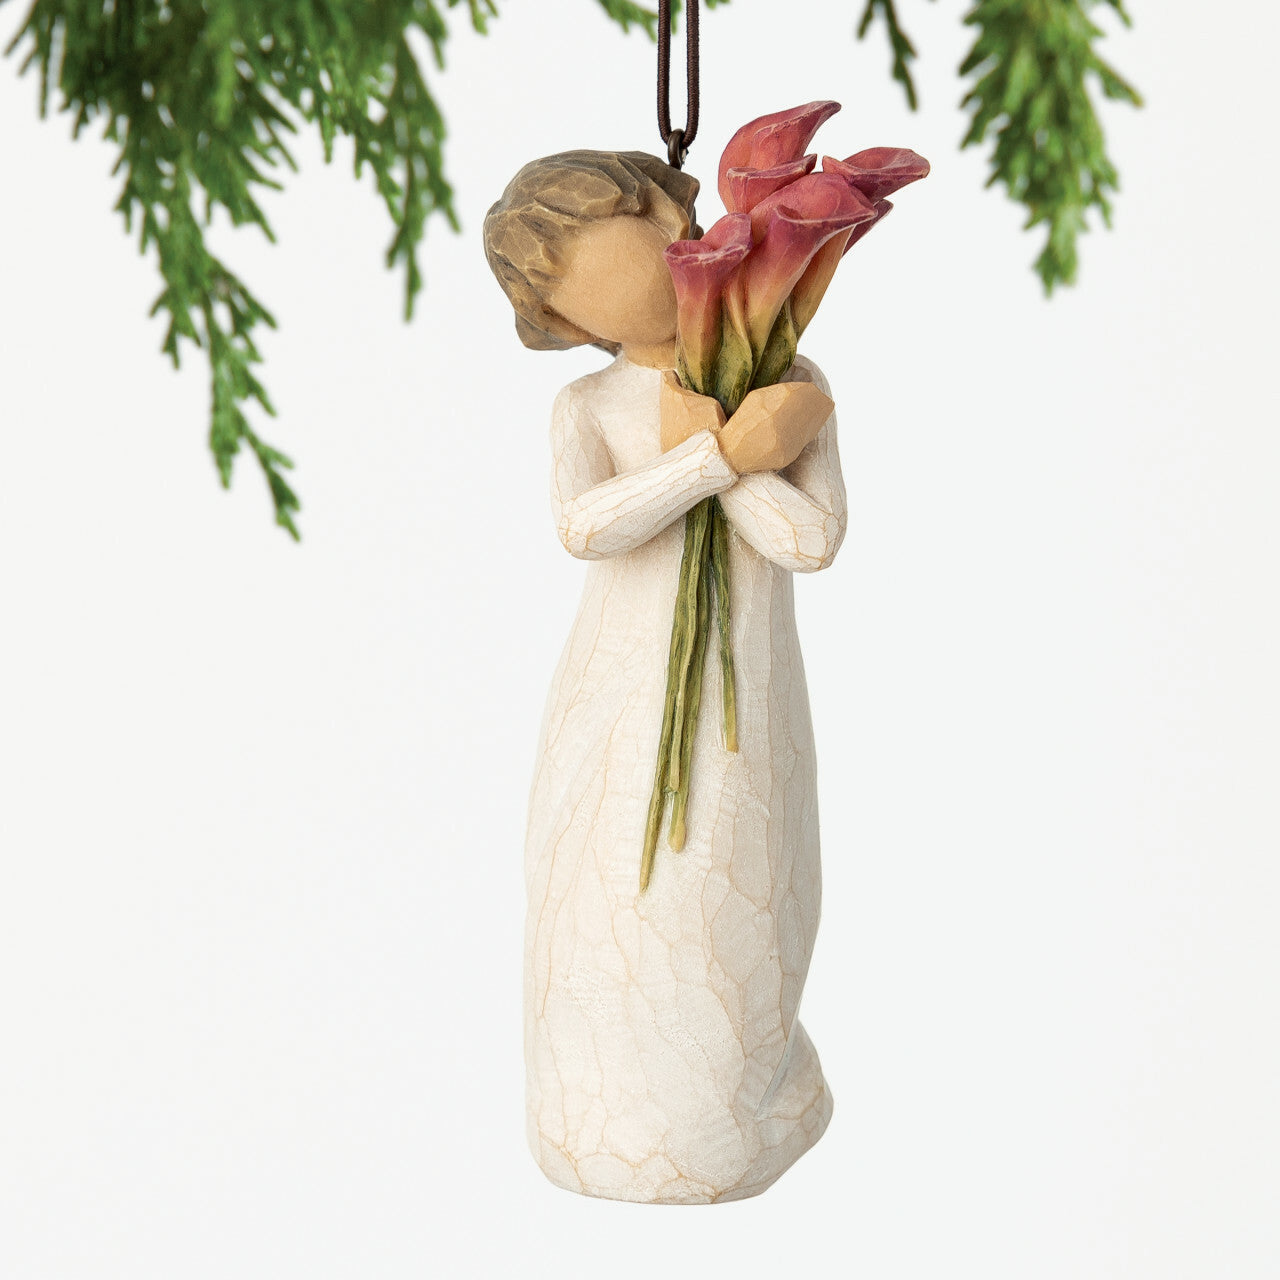 Bloom Willow Tree® Ornament Sculpted by Susan Lordi